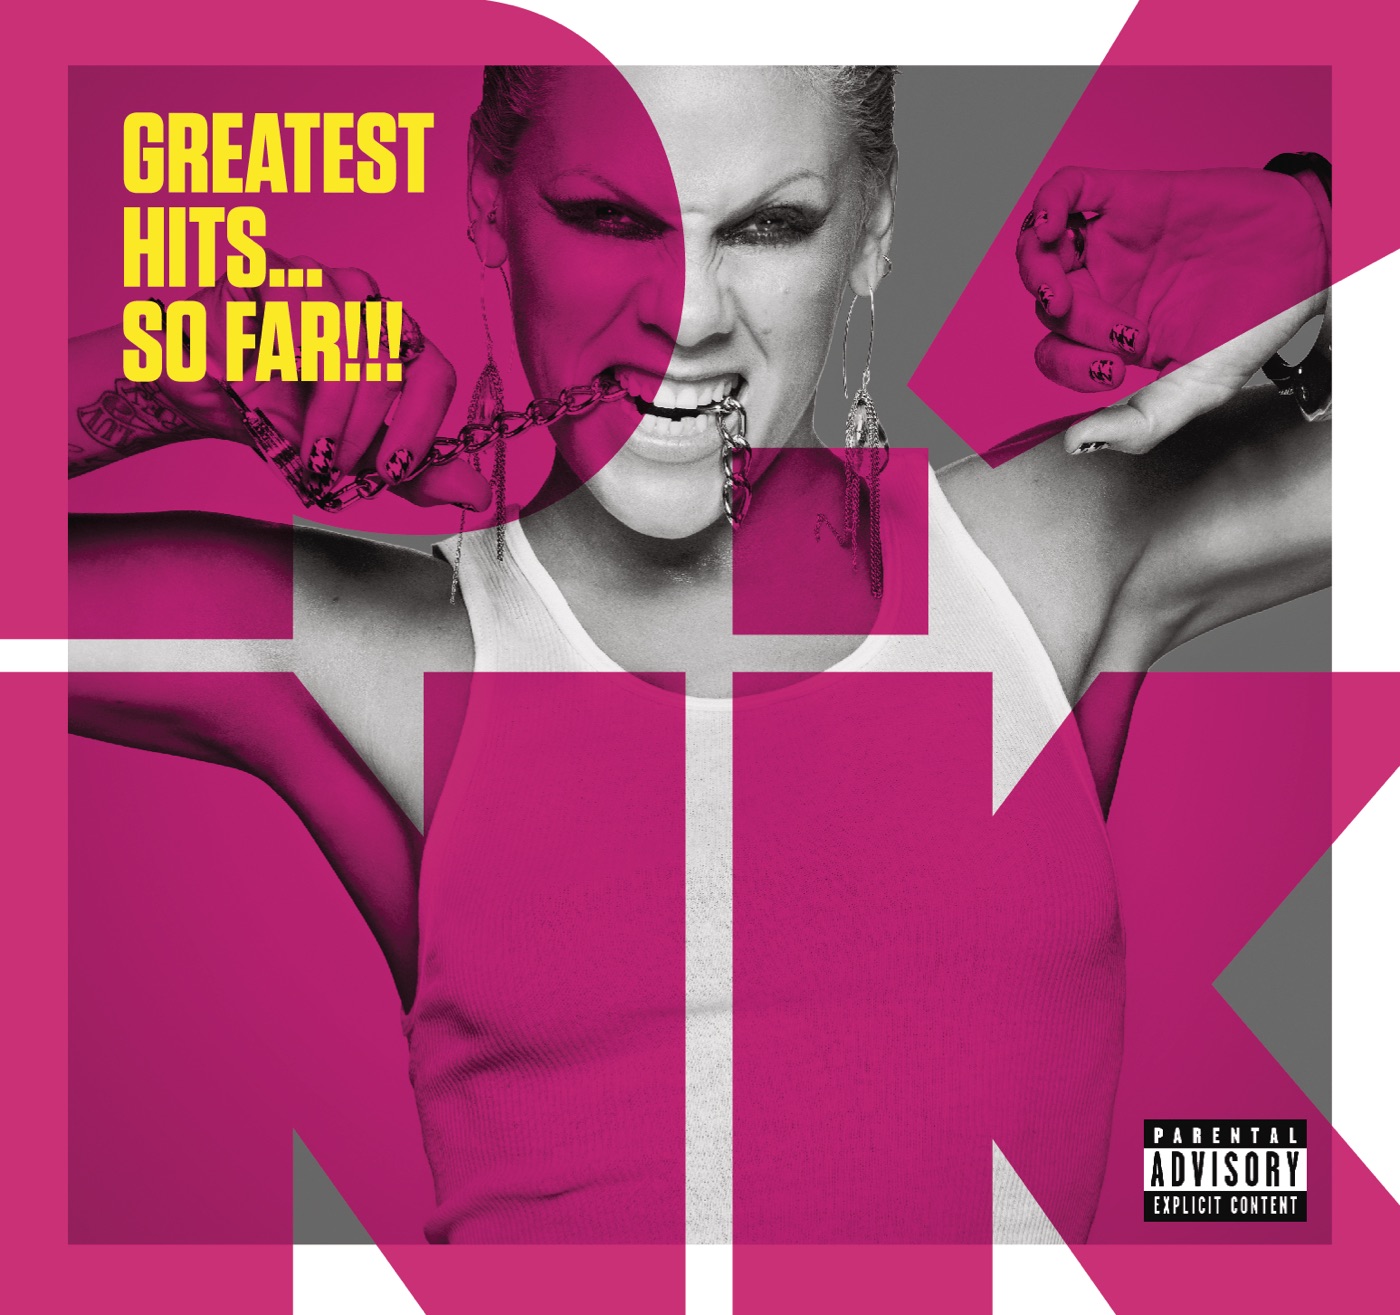 Raise Your Glass by P!nk